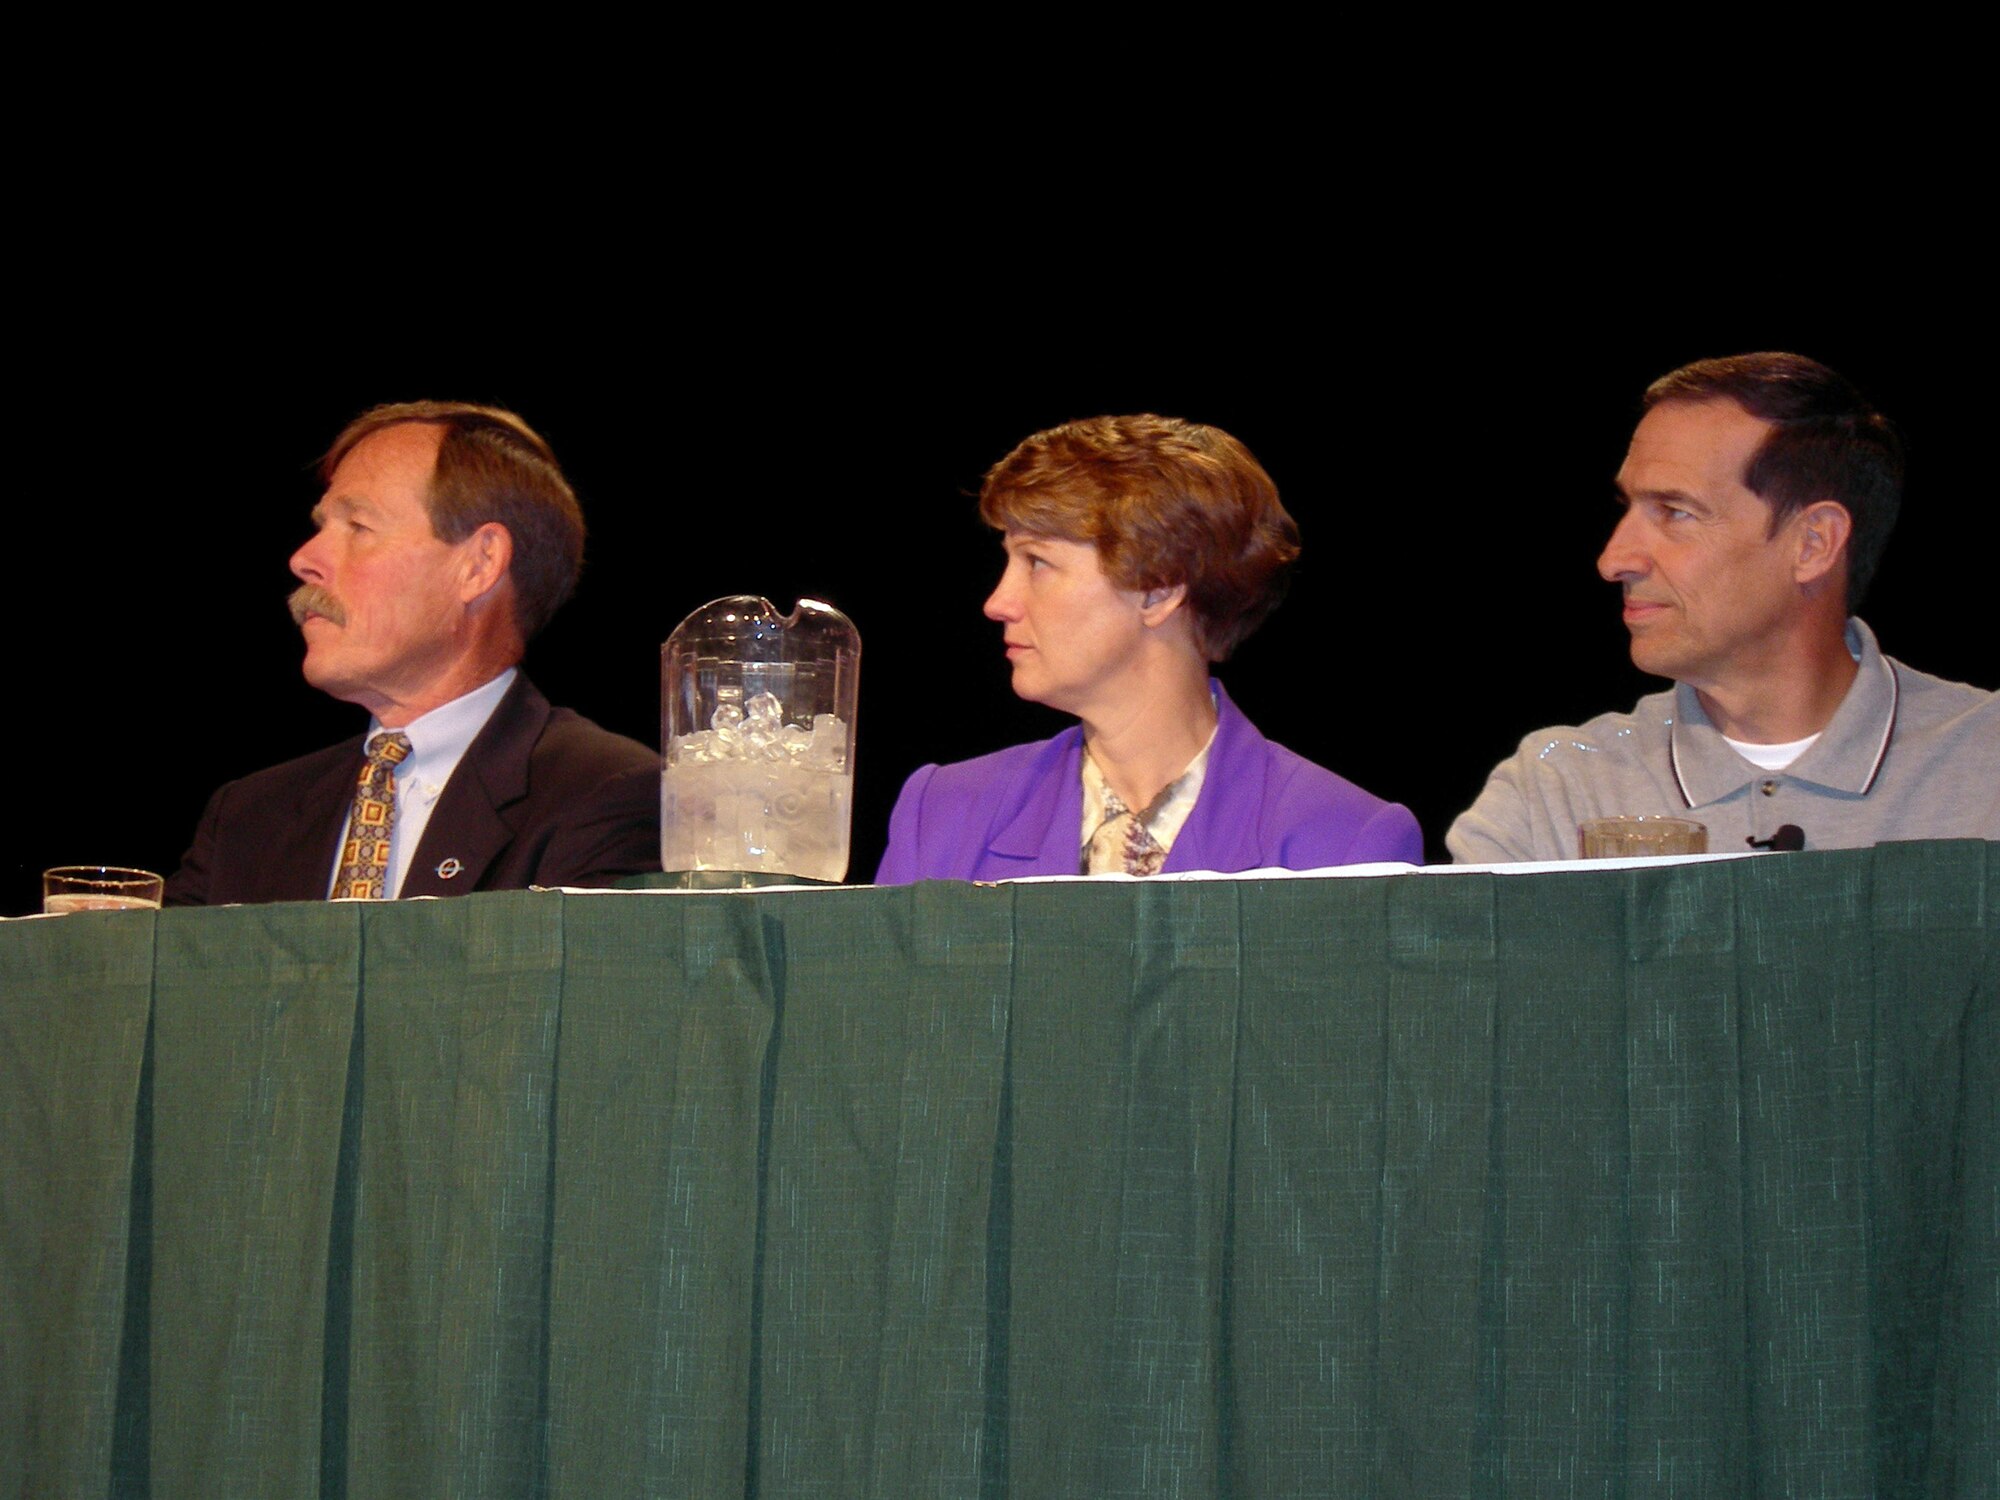 Retired Air Force Col. Eileen Collins is flanked by Robert "Hoot" Gibson, left, and Brian Binnie at the 17th International Women in Aviation Conference in Nashville, Tenn., on Saturday, March 25, 2006. (U.S. Air Force photo/Annette Crawford)